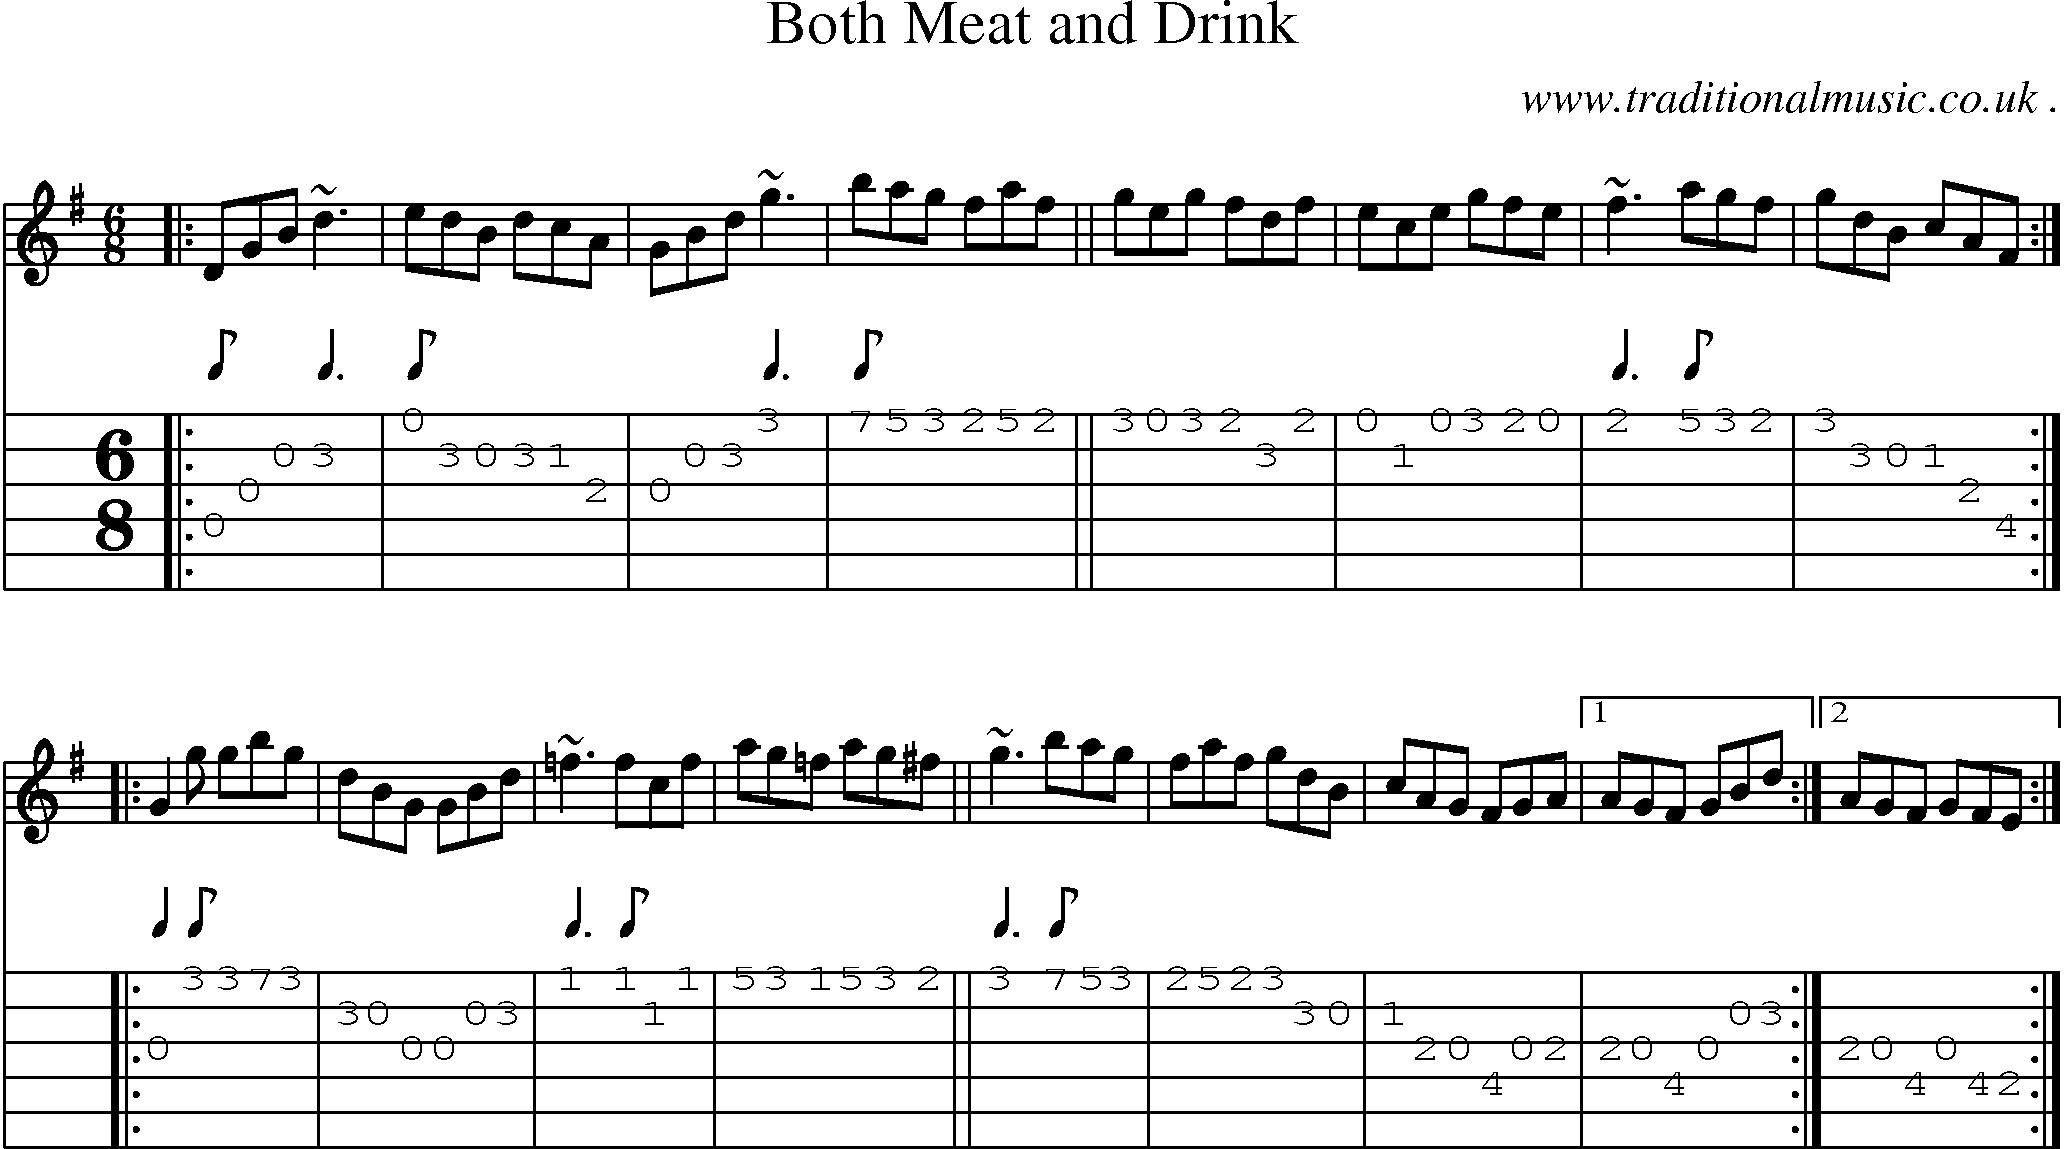 Sheet-music  score, Chords and Guitar Tabs for Both Meat And Drink